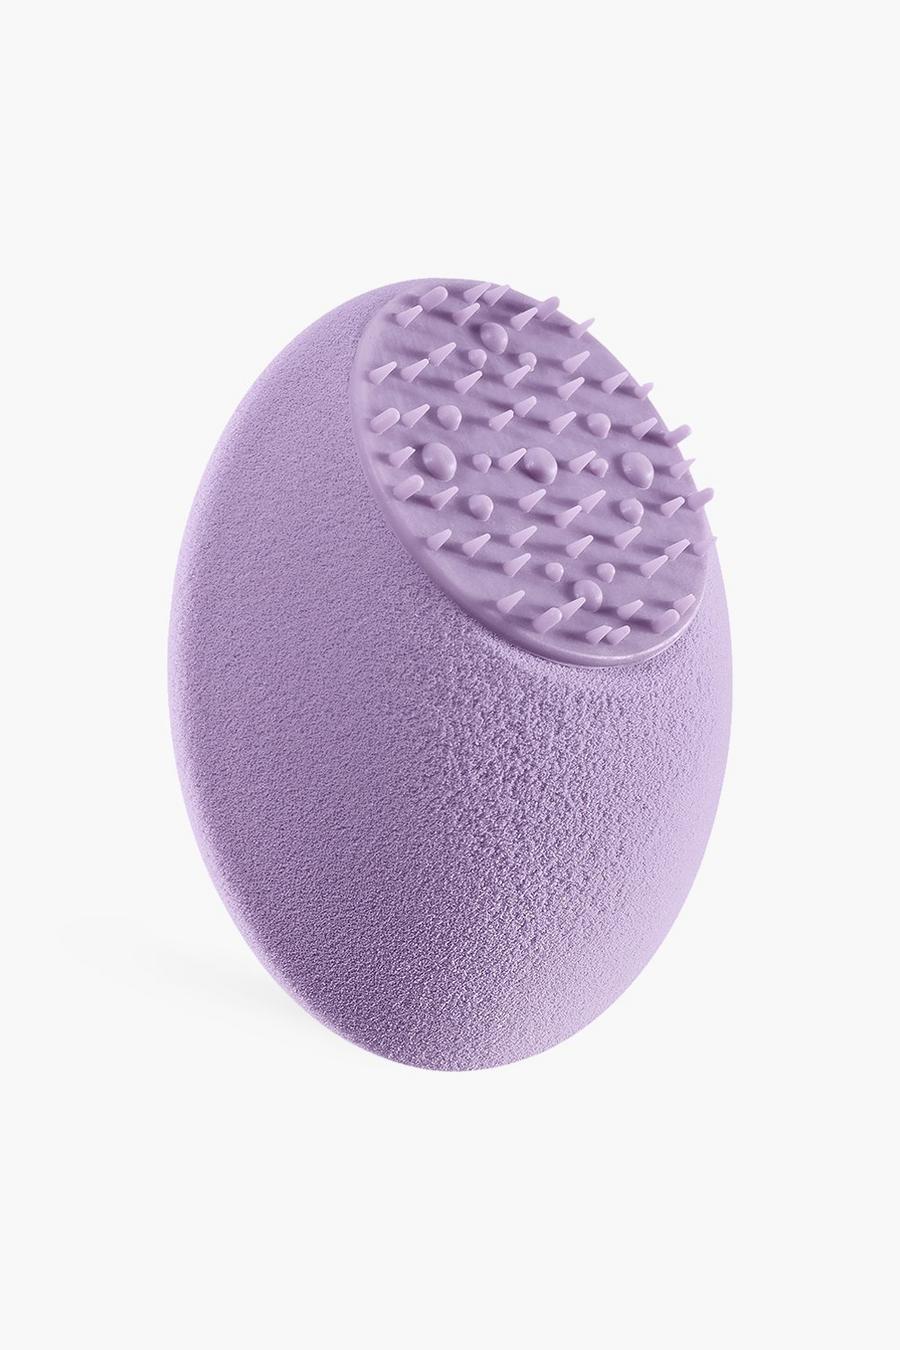 Real Technique Schwamm +Miracle Skincare-Schwamm, Lilac violet